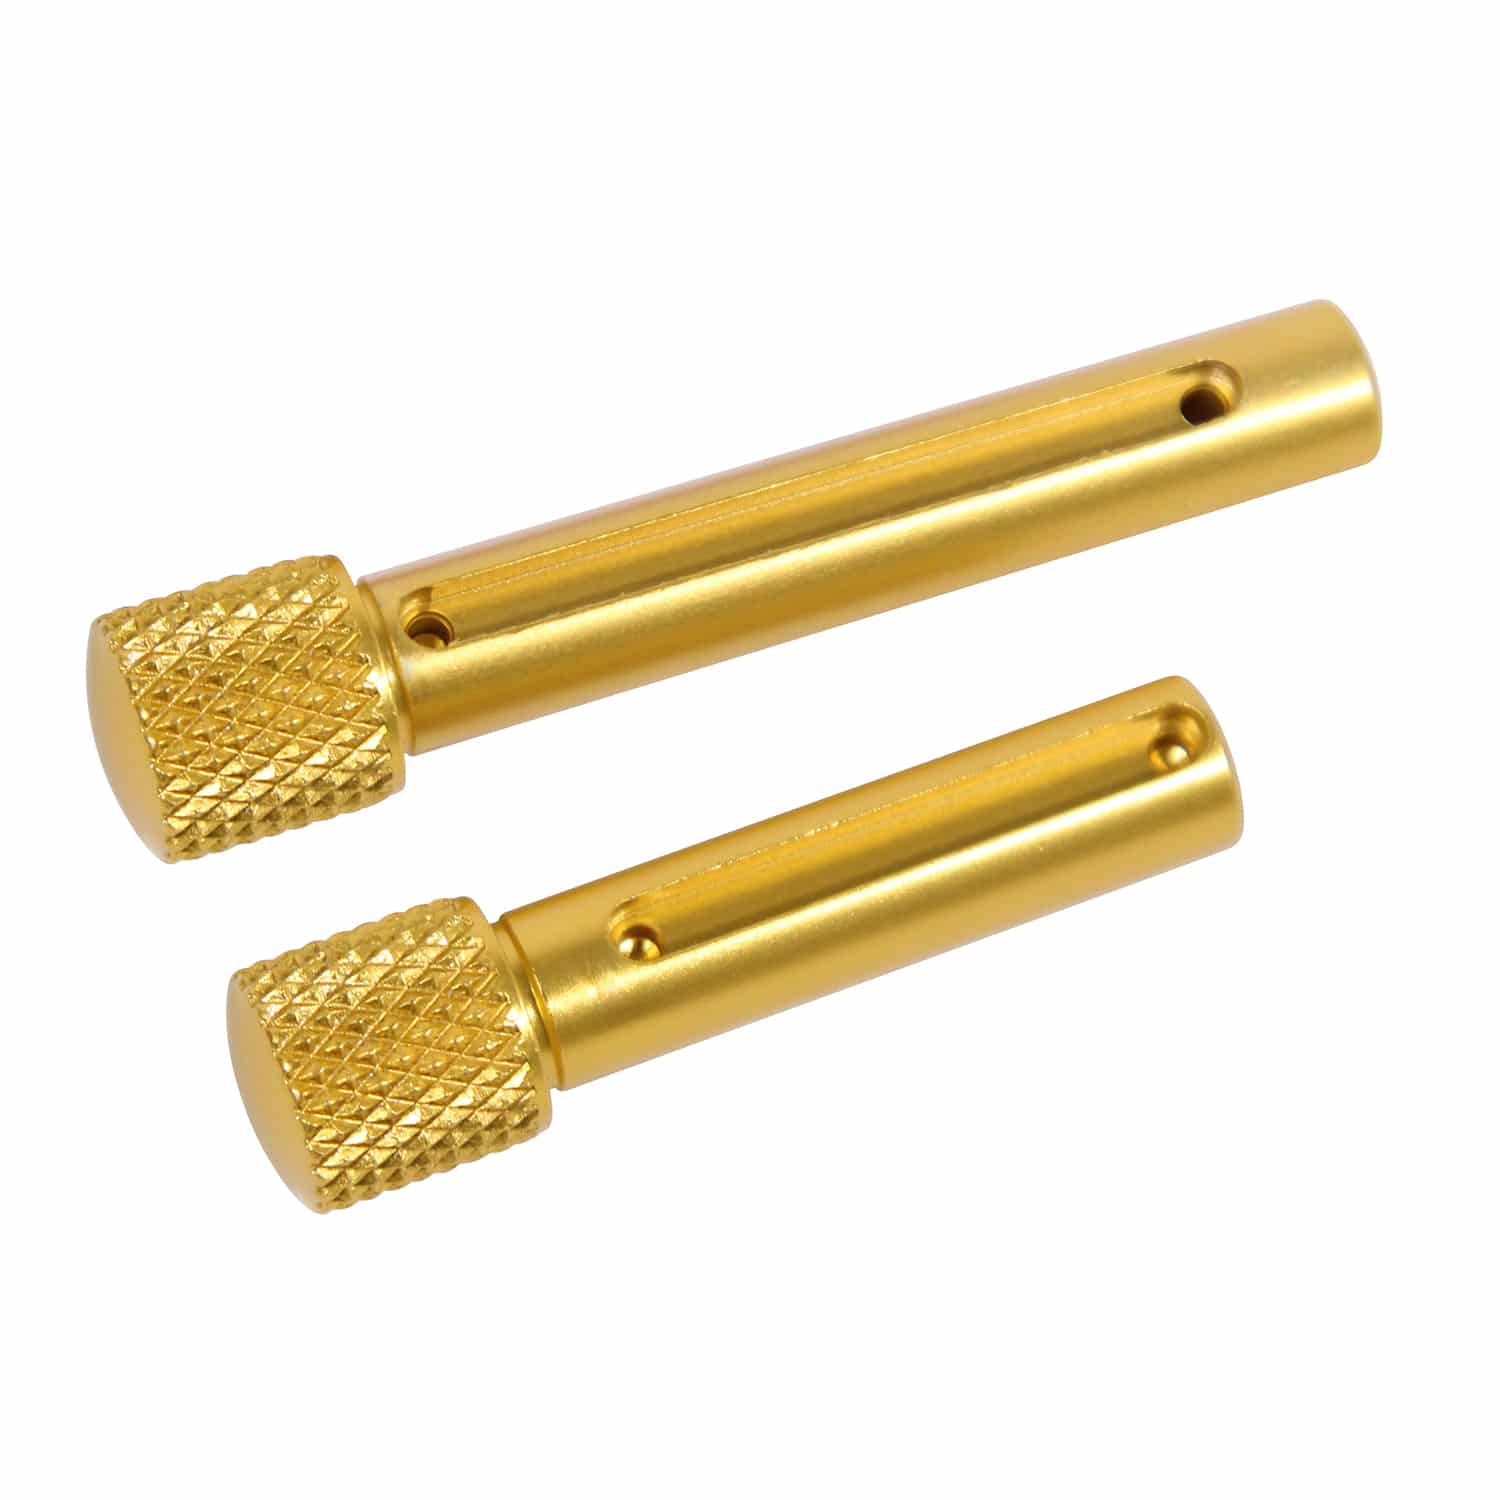 AR .308 Cal Extended Takedown Pin Set (Gen 2) (Anodized Gold)